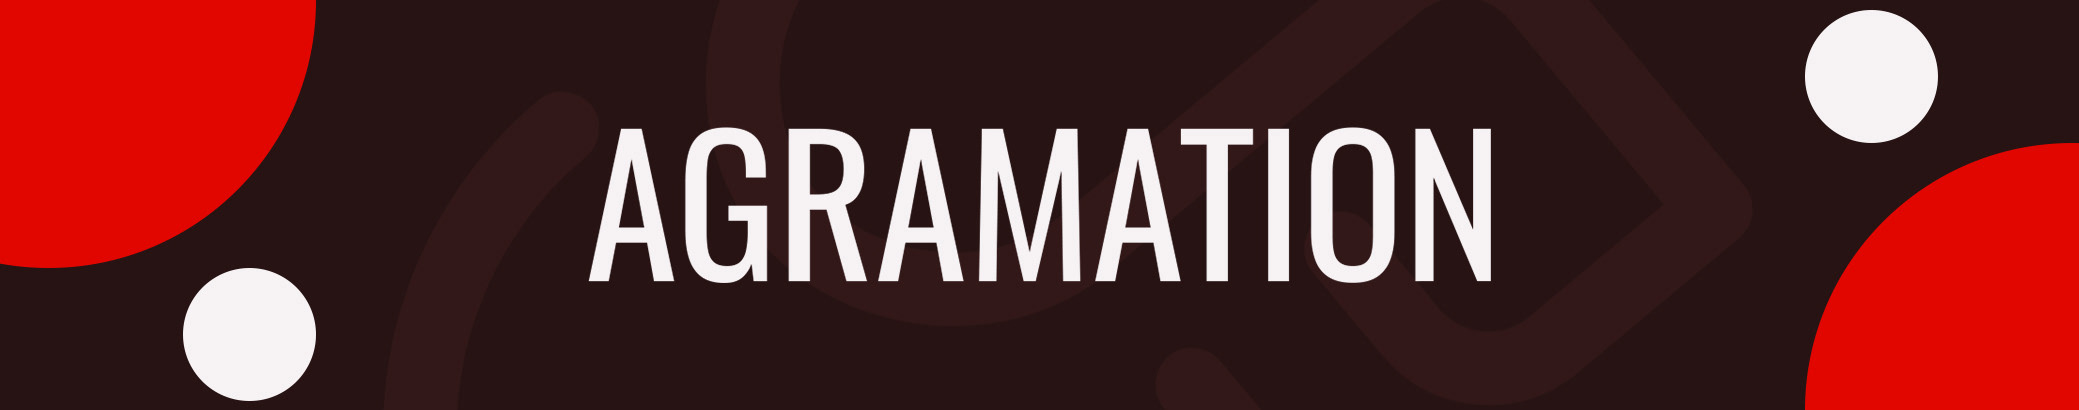 Agramation Company's profile banner